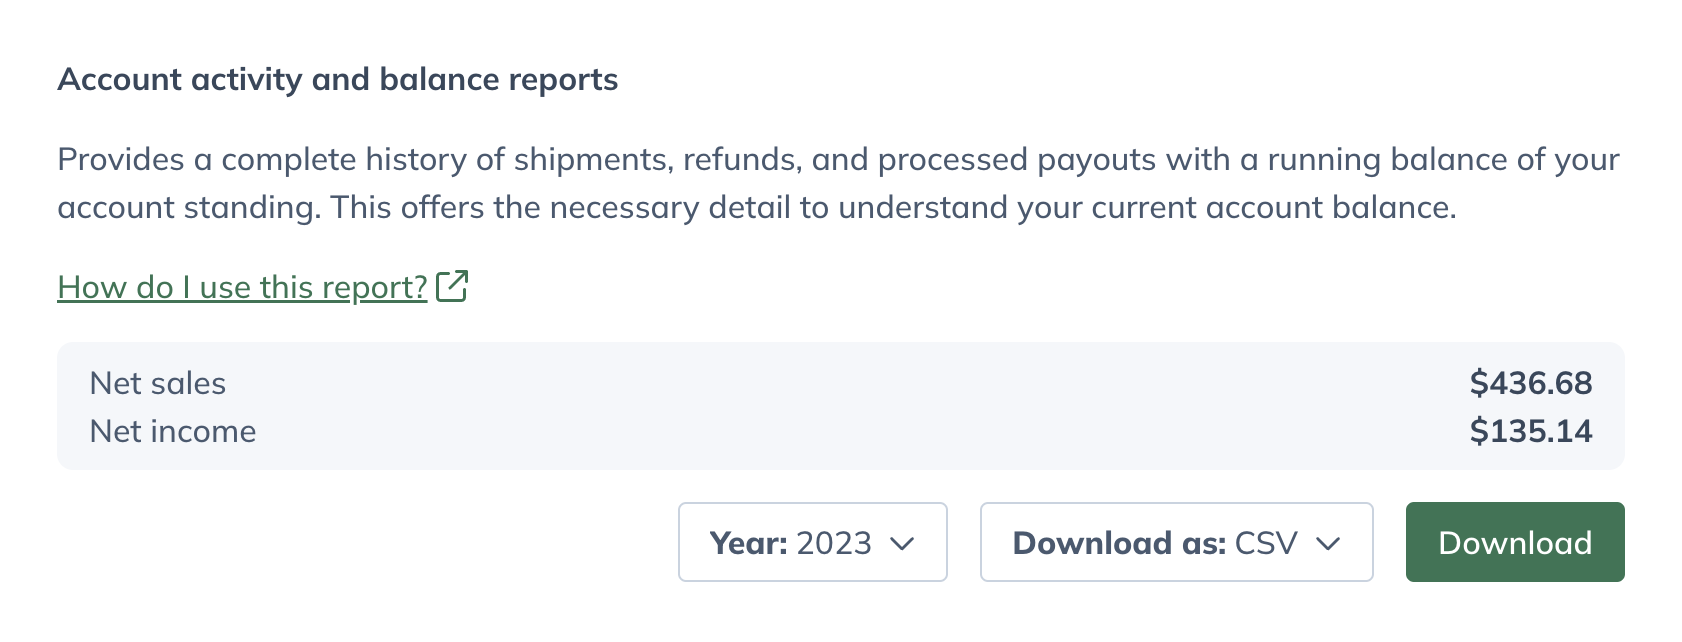 the account activity and balance report summary from the reports page